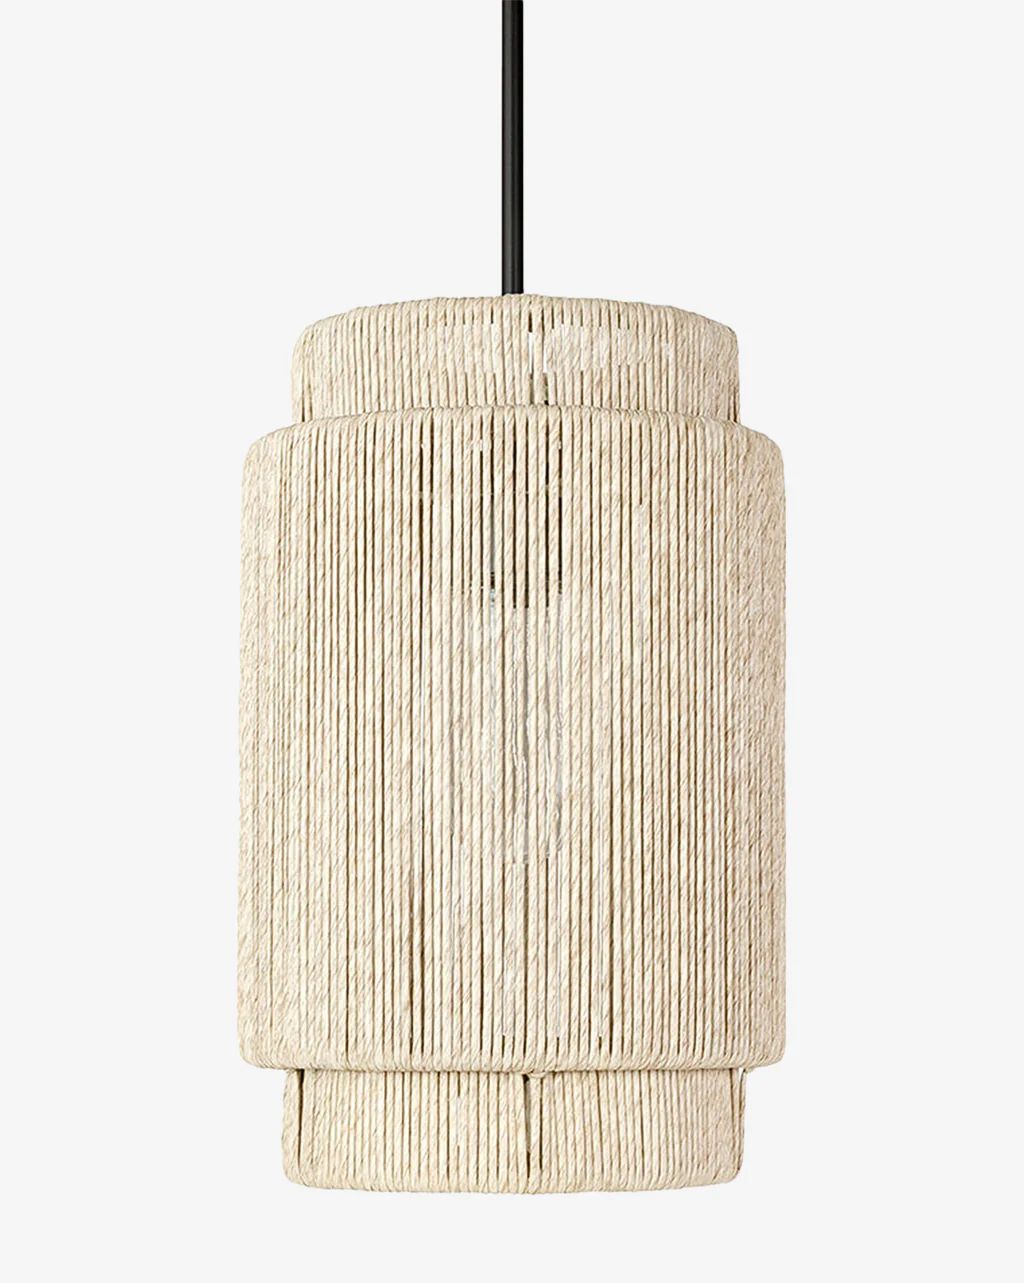 Everly Small Outdoor Pendant | McGee & Co.